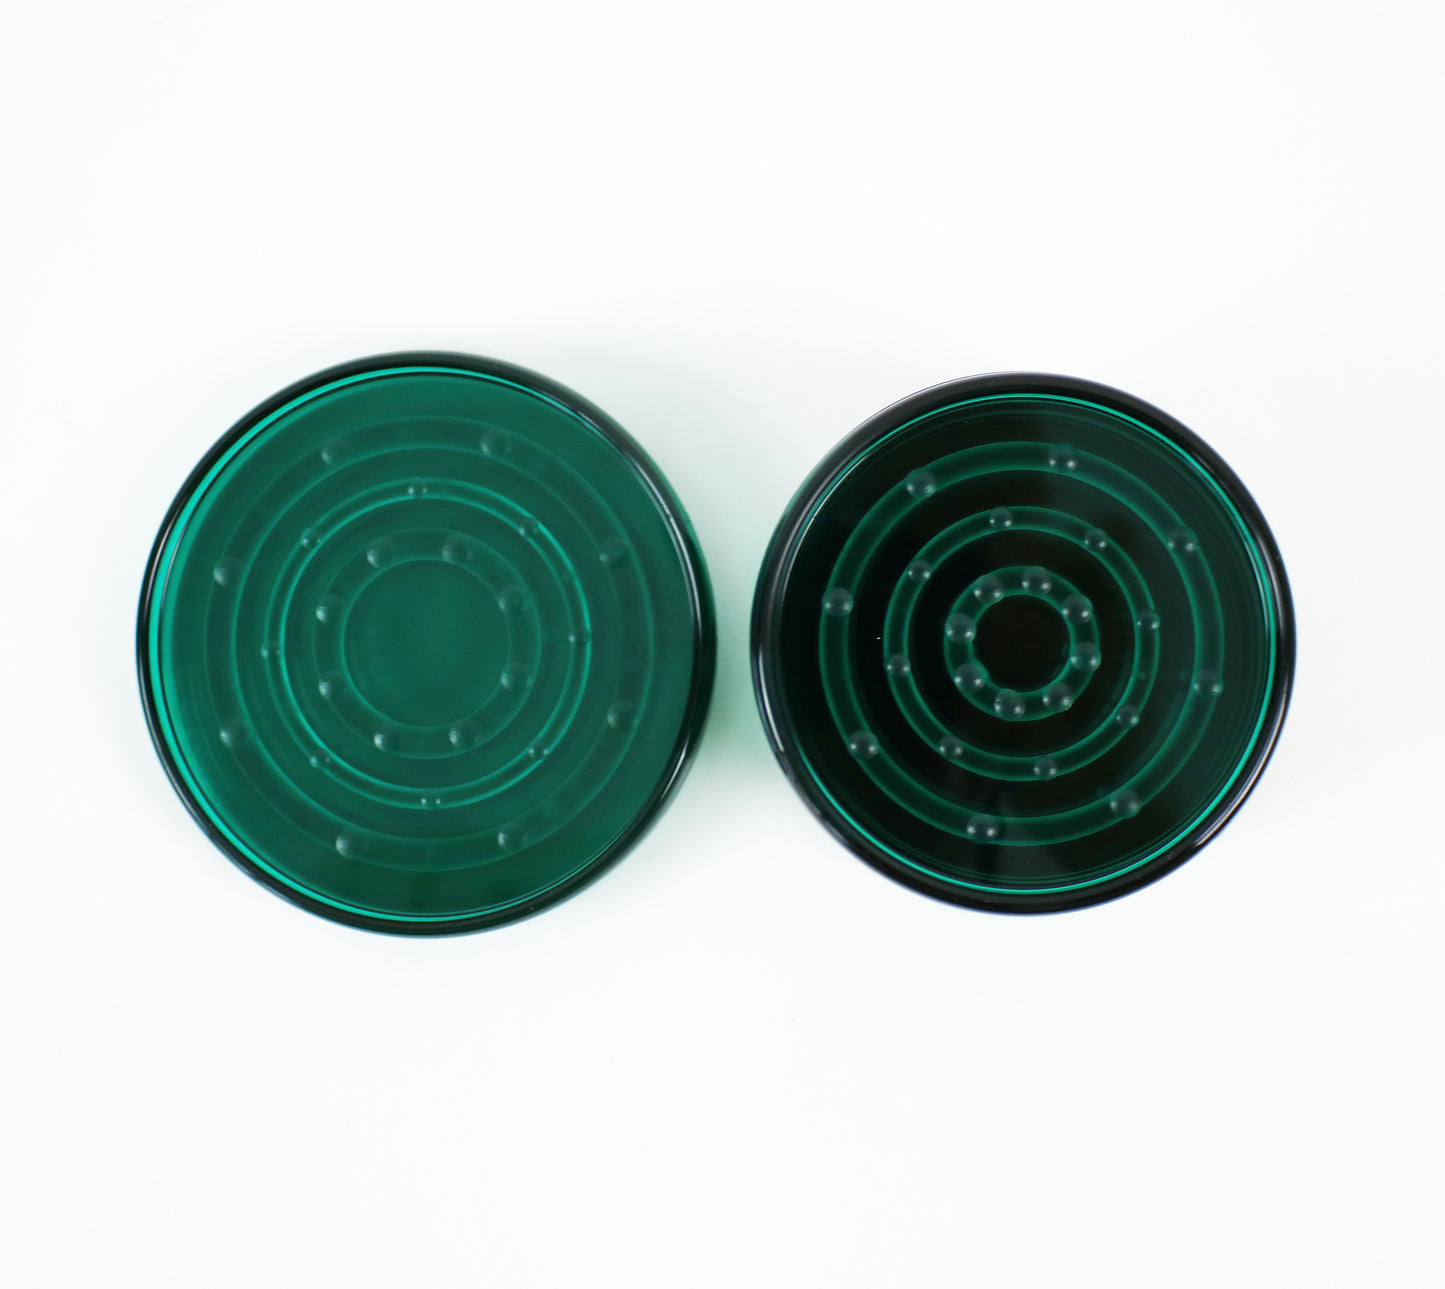 Transparent green acrylic drinks coaster set by Guzzini Italy - 1990s - 8 pieces